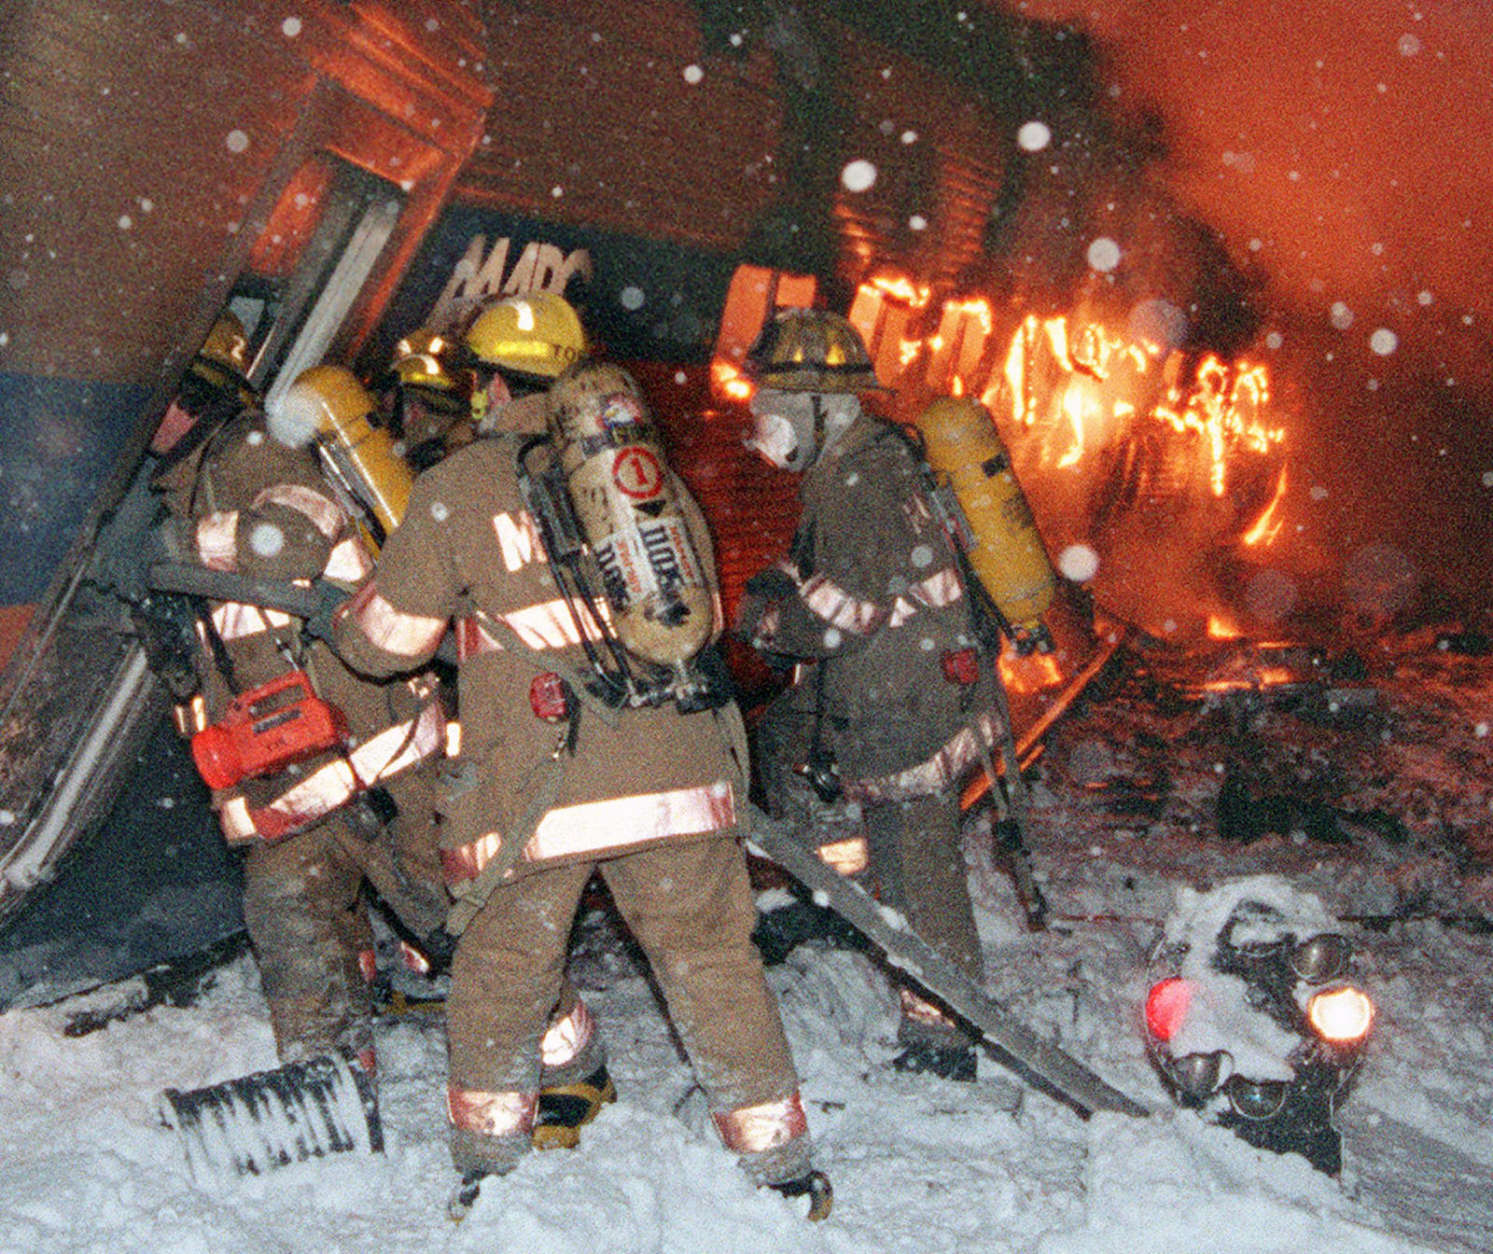 Firefighters look for passengers aboard a MARC commuter train Friday Feb. 16, 1996 in Silver Spring, Md. after a train collision. Amtrak's Capital Limited train on a run between Chicago and Washington collided with another train. (AP Photo/Henrik G. de Gyor)